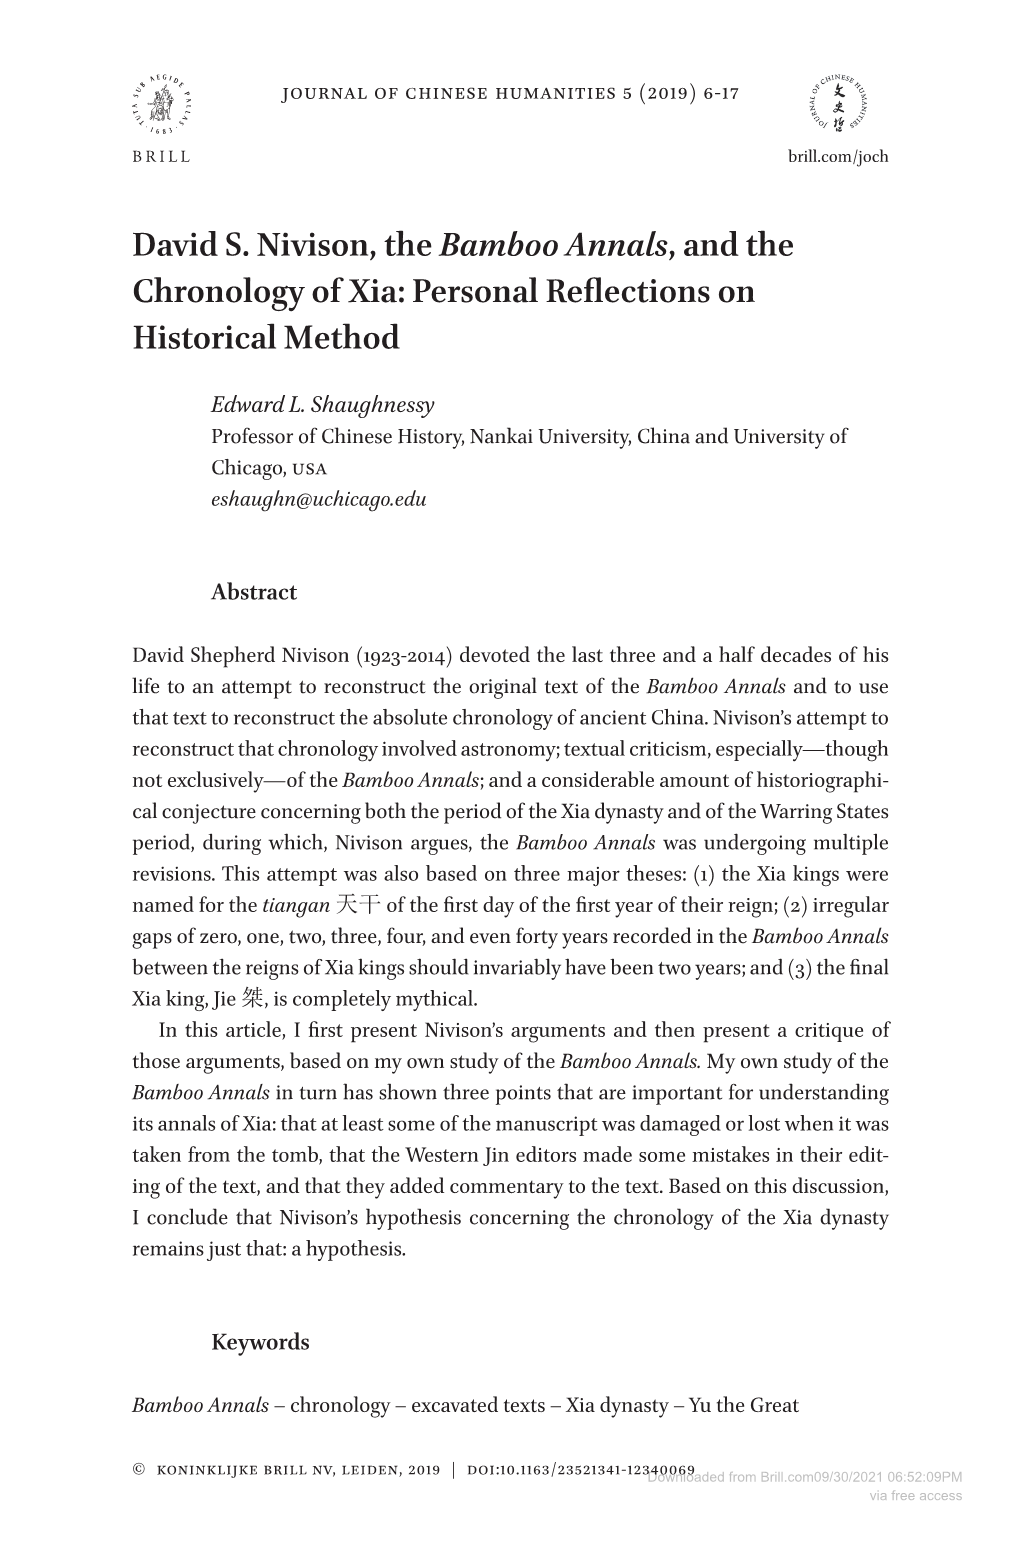 David S. Nivison, the Bamboo Annals, and the Chronology of Xia: Personal Reflections on Historical Method